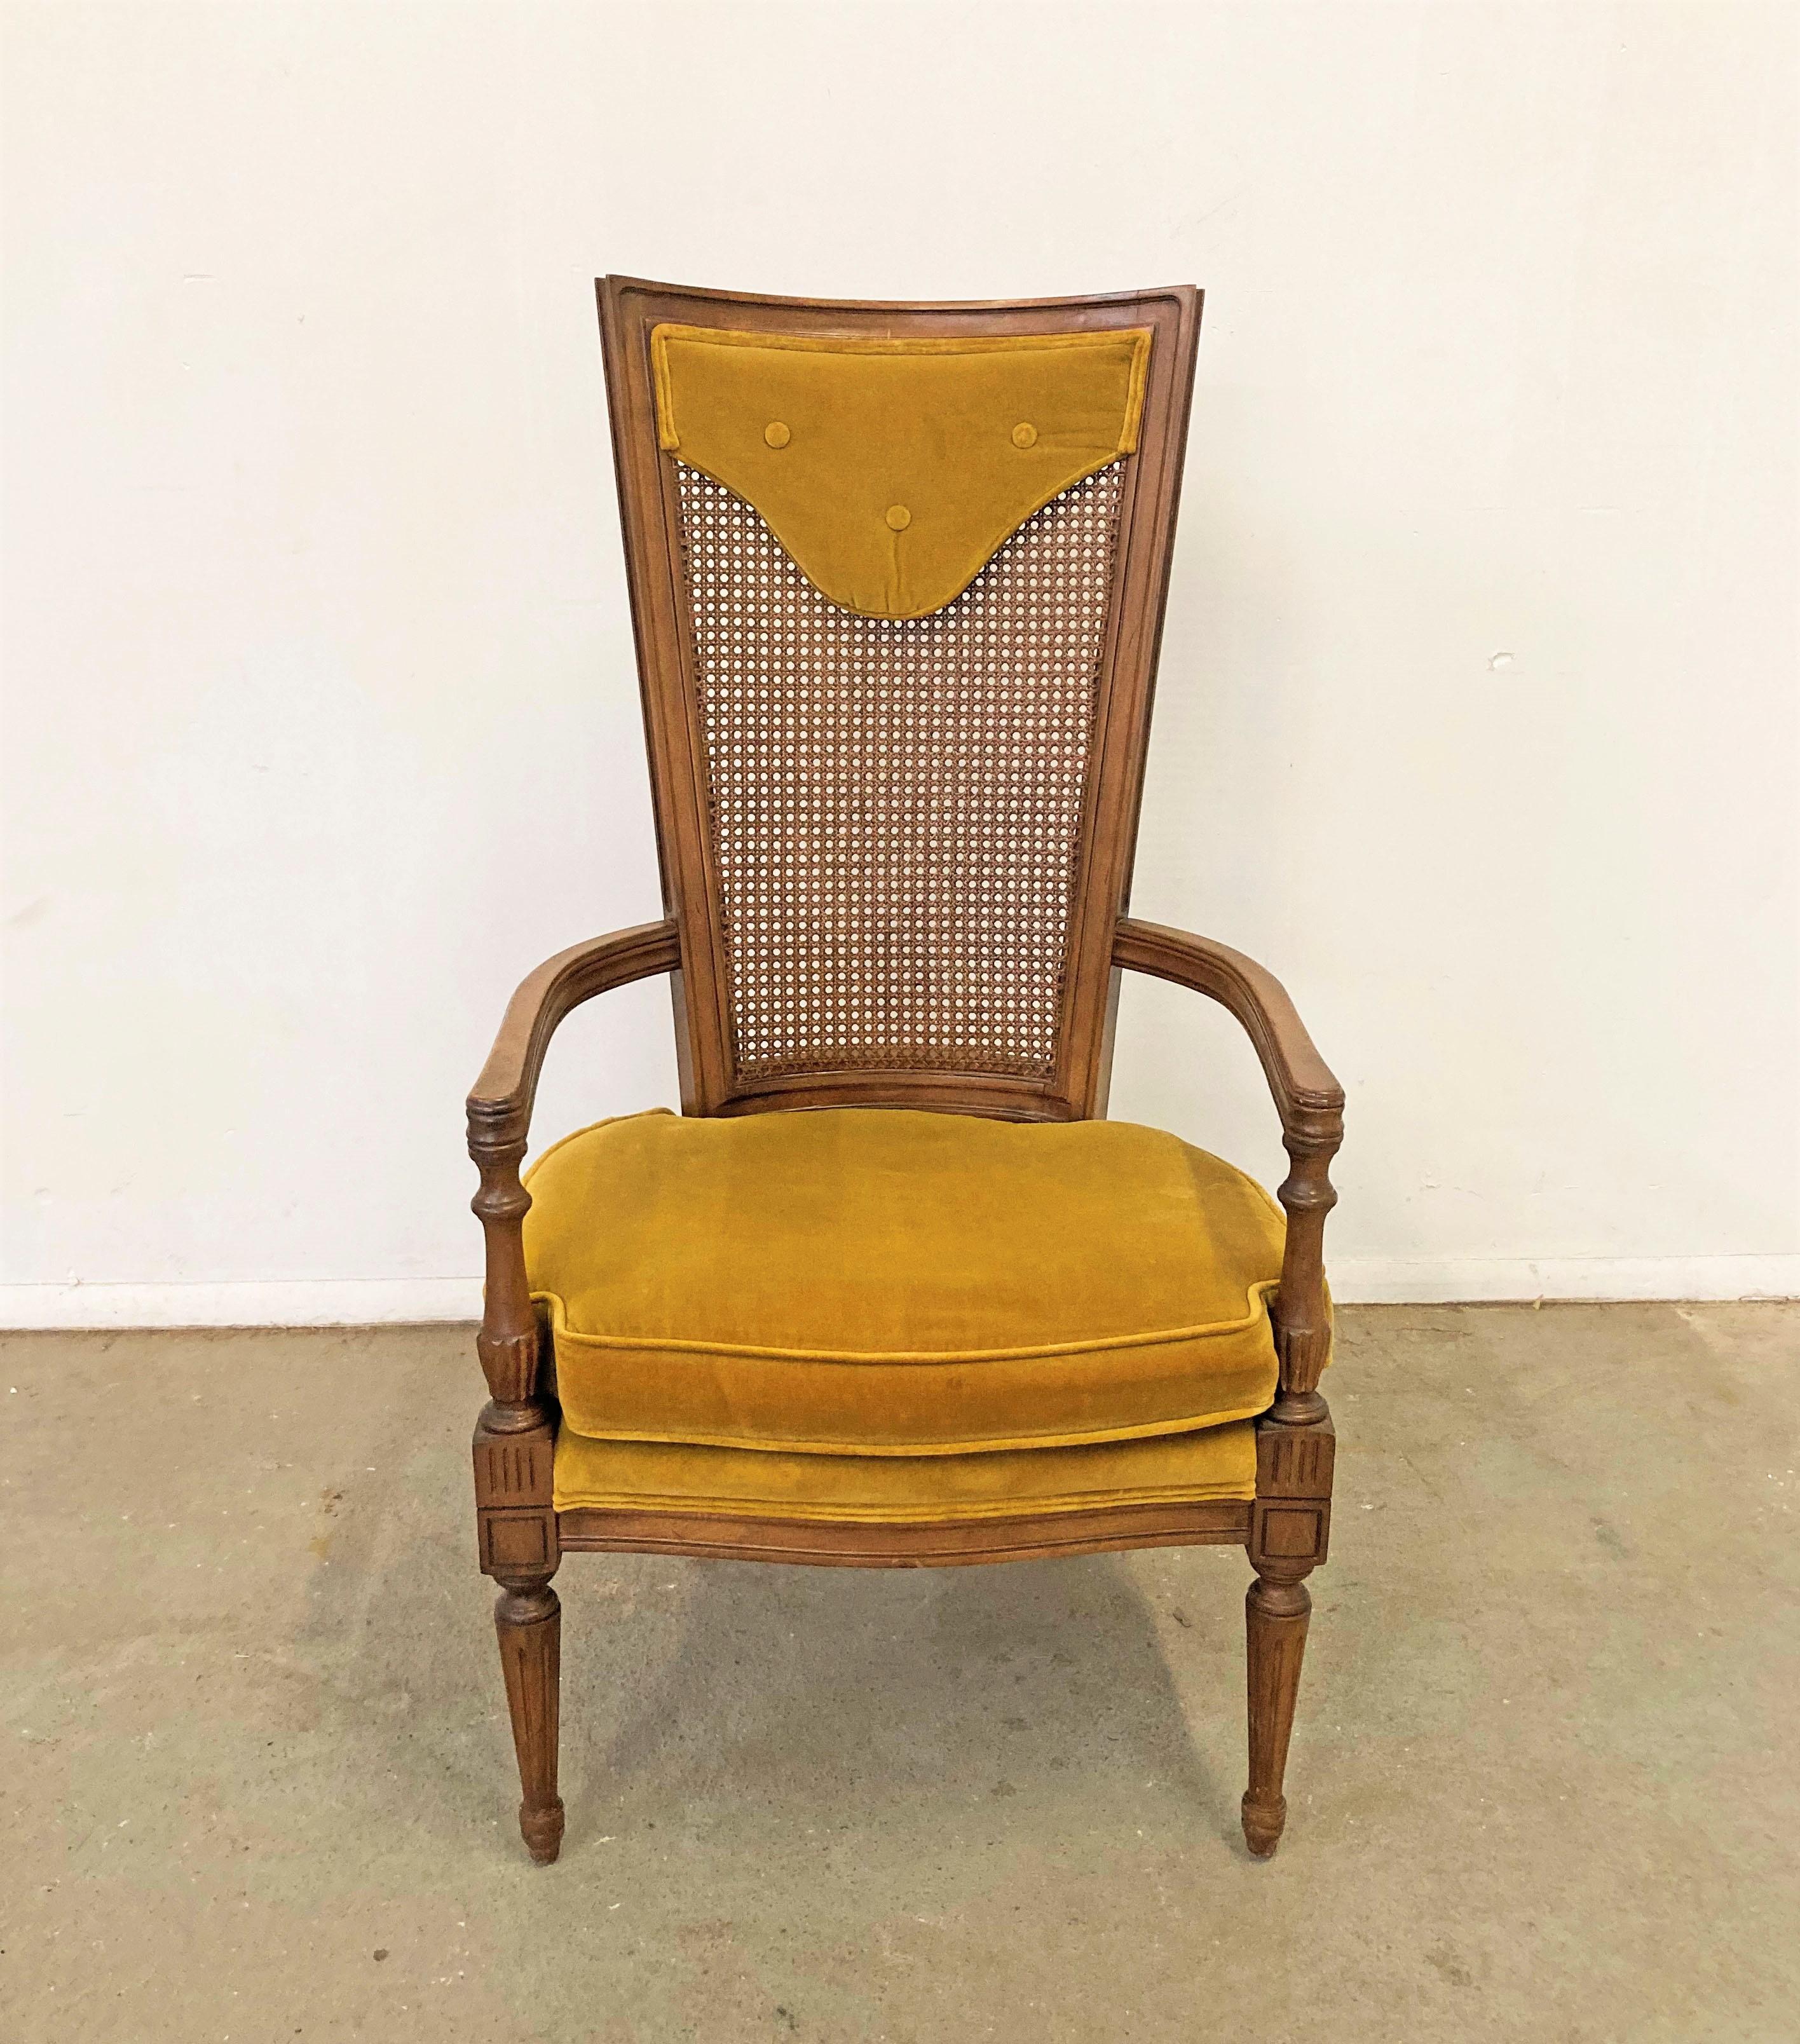 Mid-Century Modern high back cane dining chair

Offered is an unusual shaped high back cane chair. This piece has original velvet upholstery that is in good vintage condition with minor fading. The chair structure has some scratching and